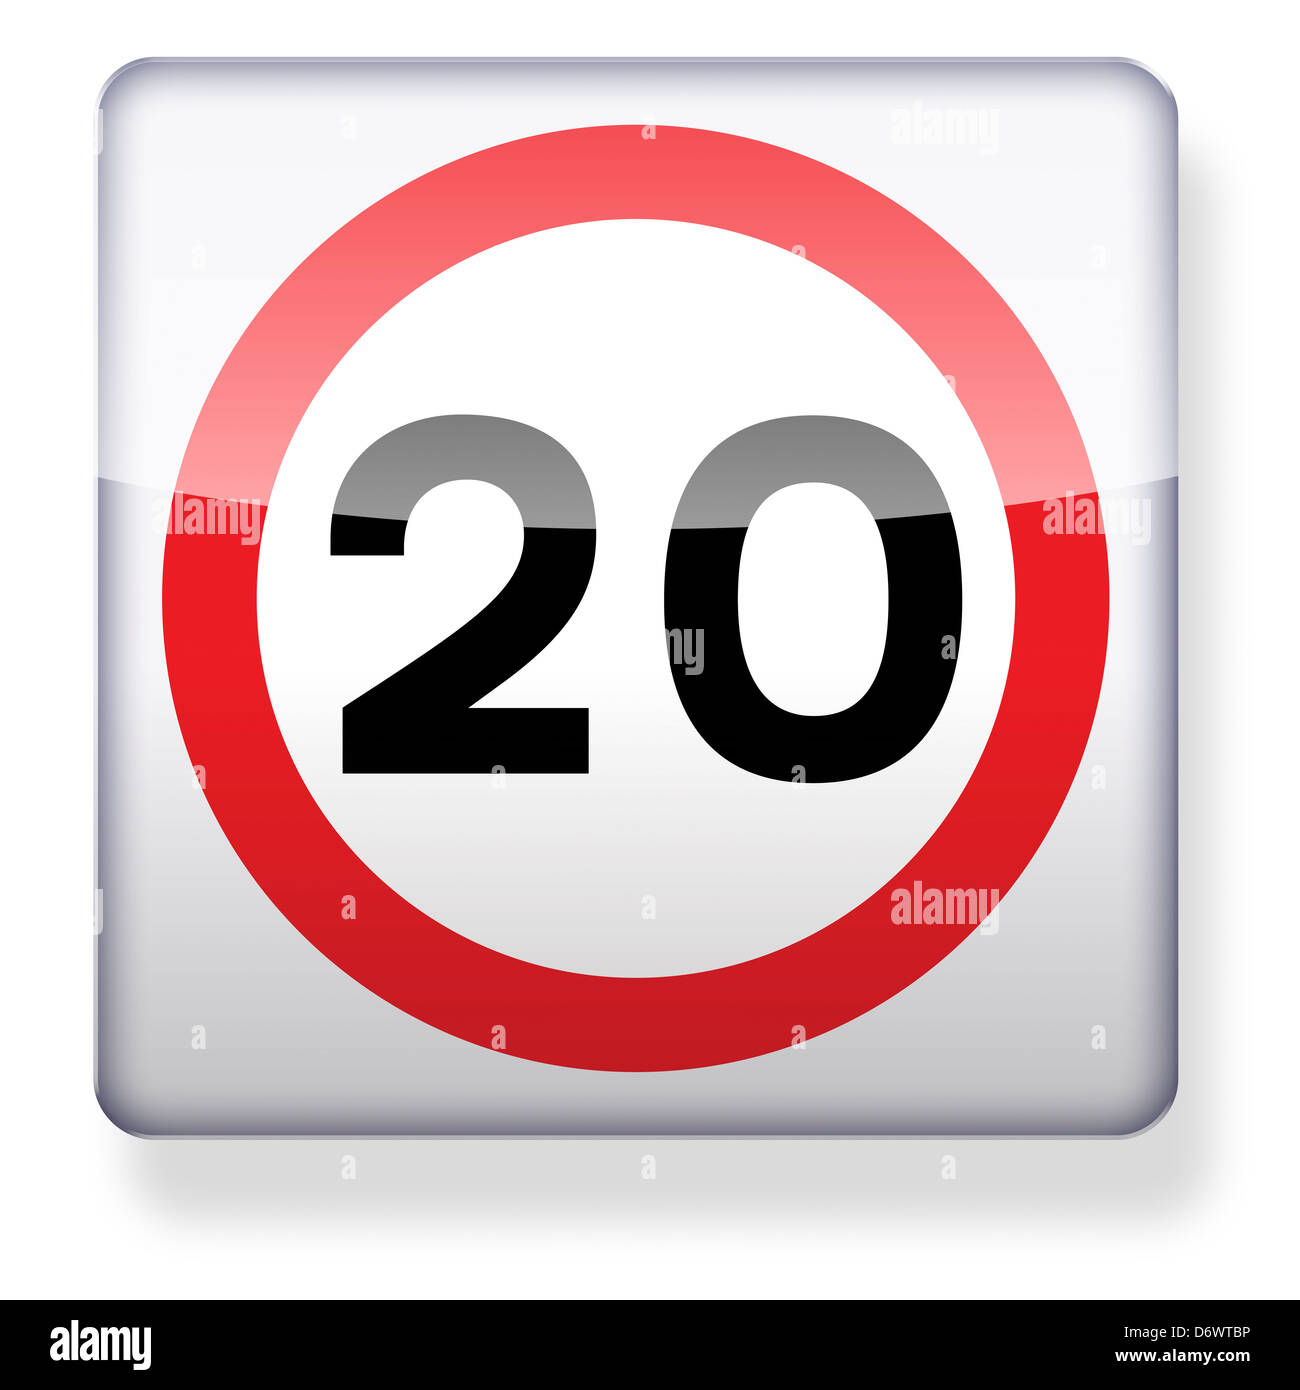 20 mph speed limit road sign as an app icon. Clipping path included. Stock Photo